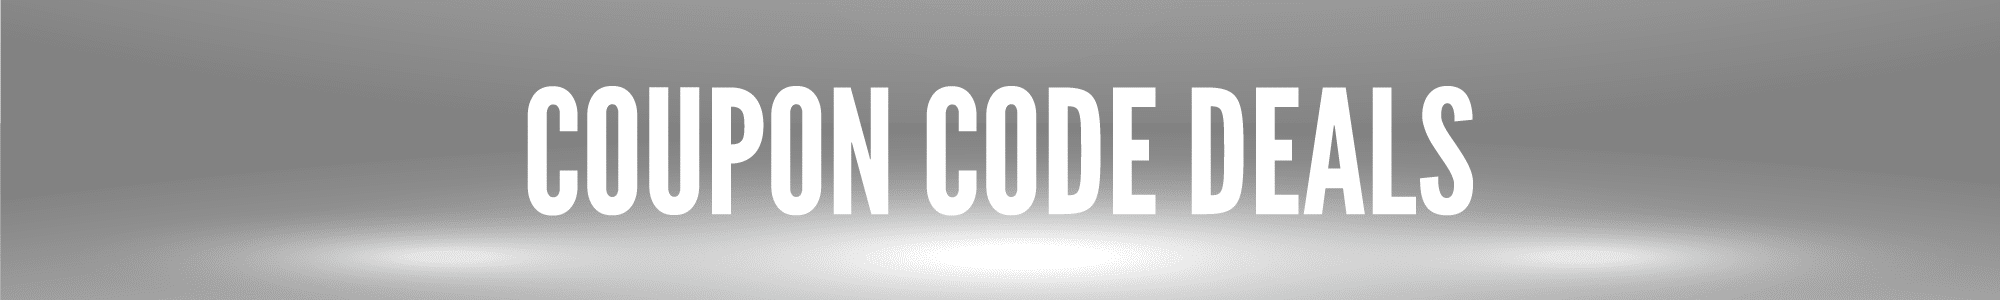 Coupon Codes banner image